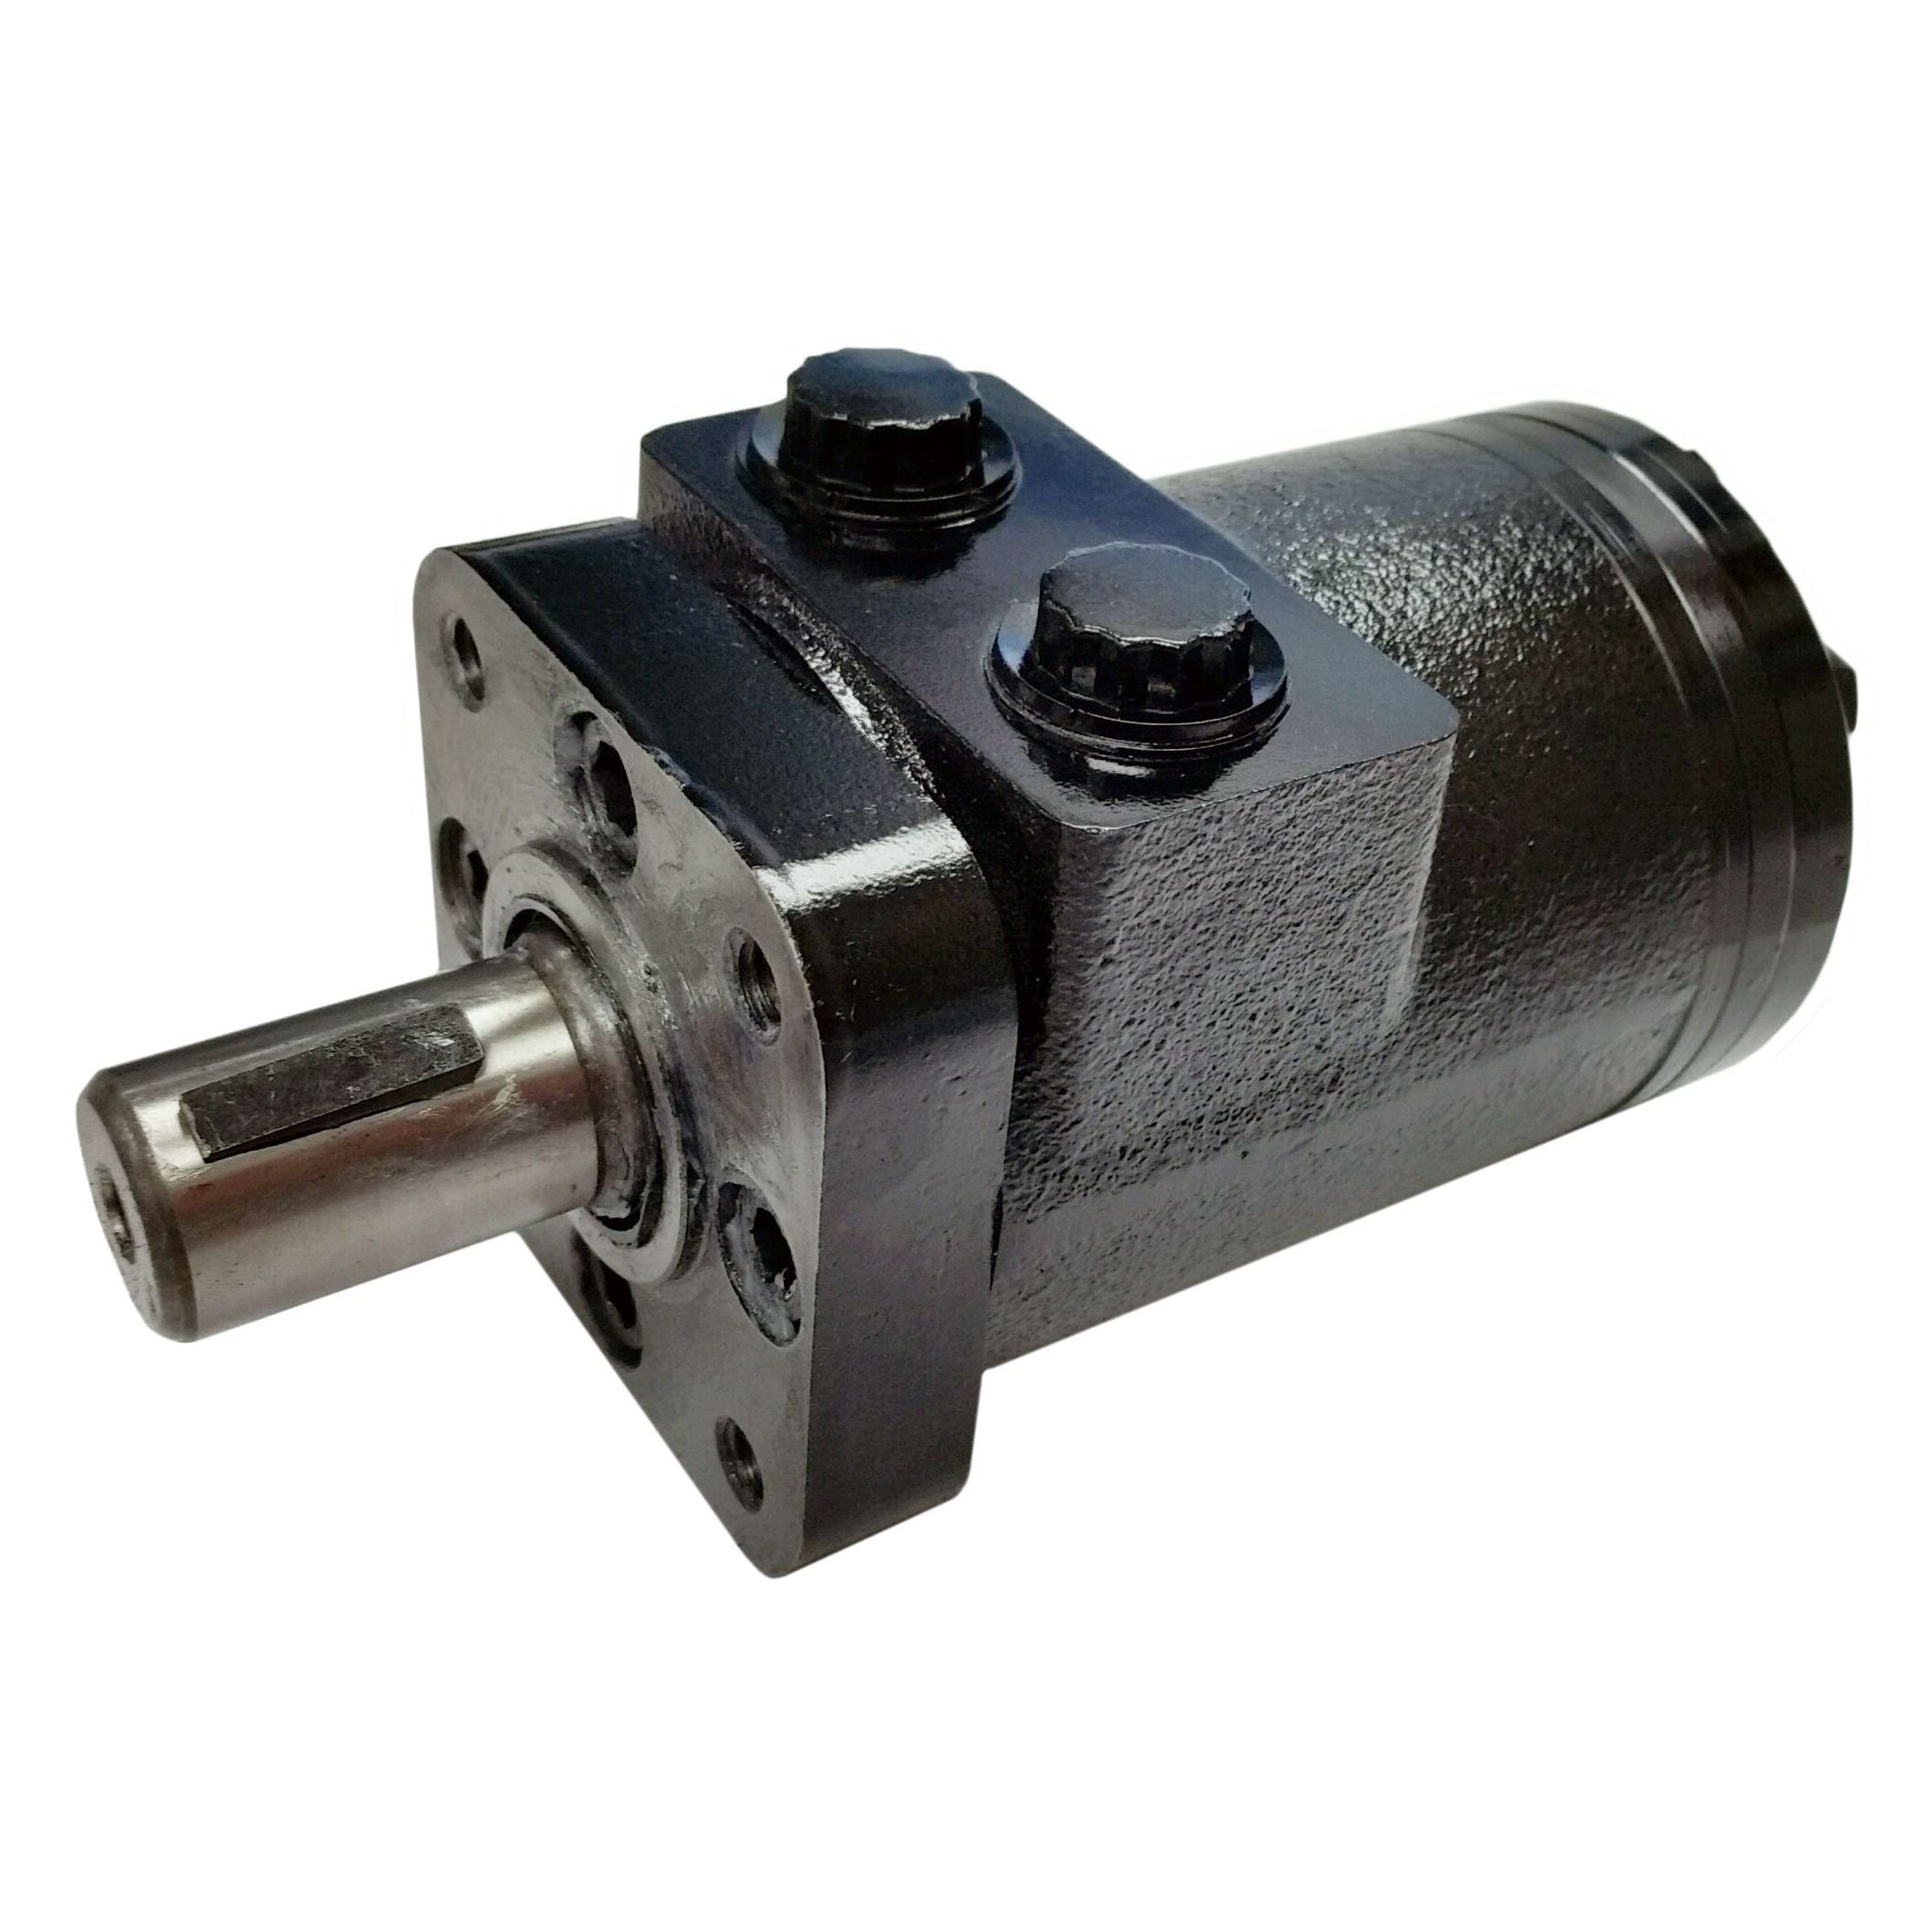 BMPH-100-H4-K-P : Dynamic LSHT Motor, 96.2cc, 615RPM, 1611in-lb, 2031psi Differential, 15.85GPM, SAE A 4-Bolt Mount, 1" Bore x 1/4" Key Shaft, Side Ported, 1/2" NPT